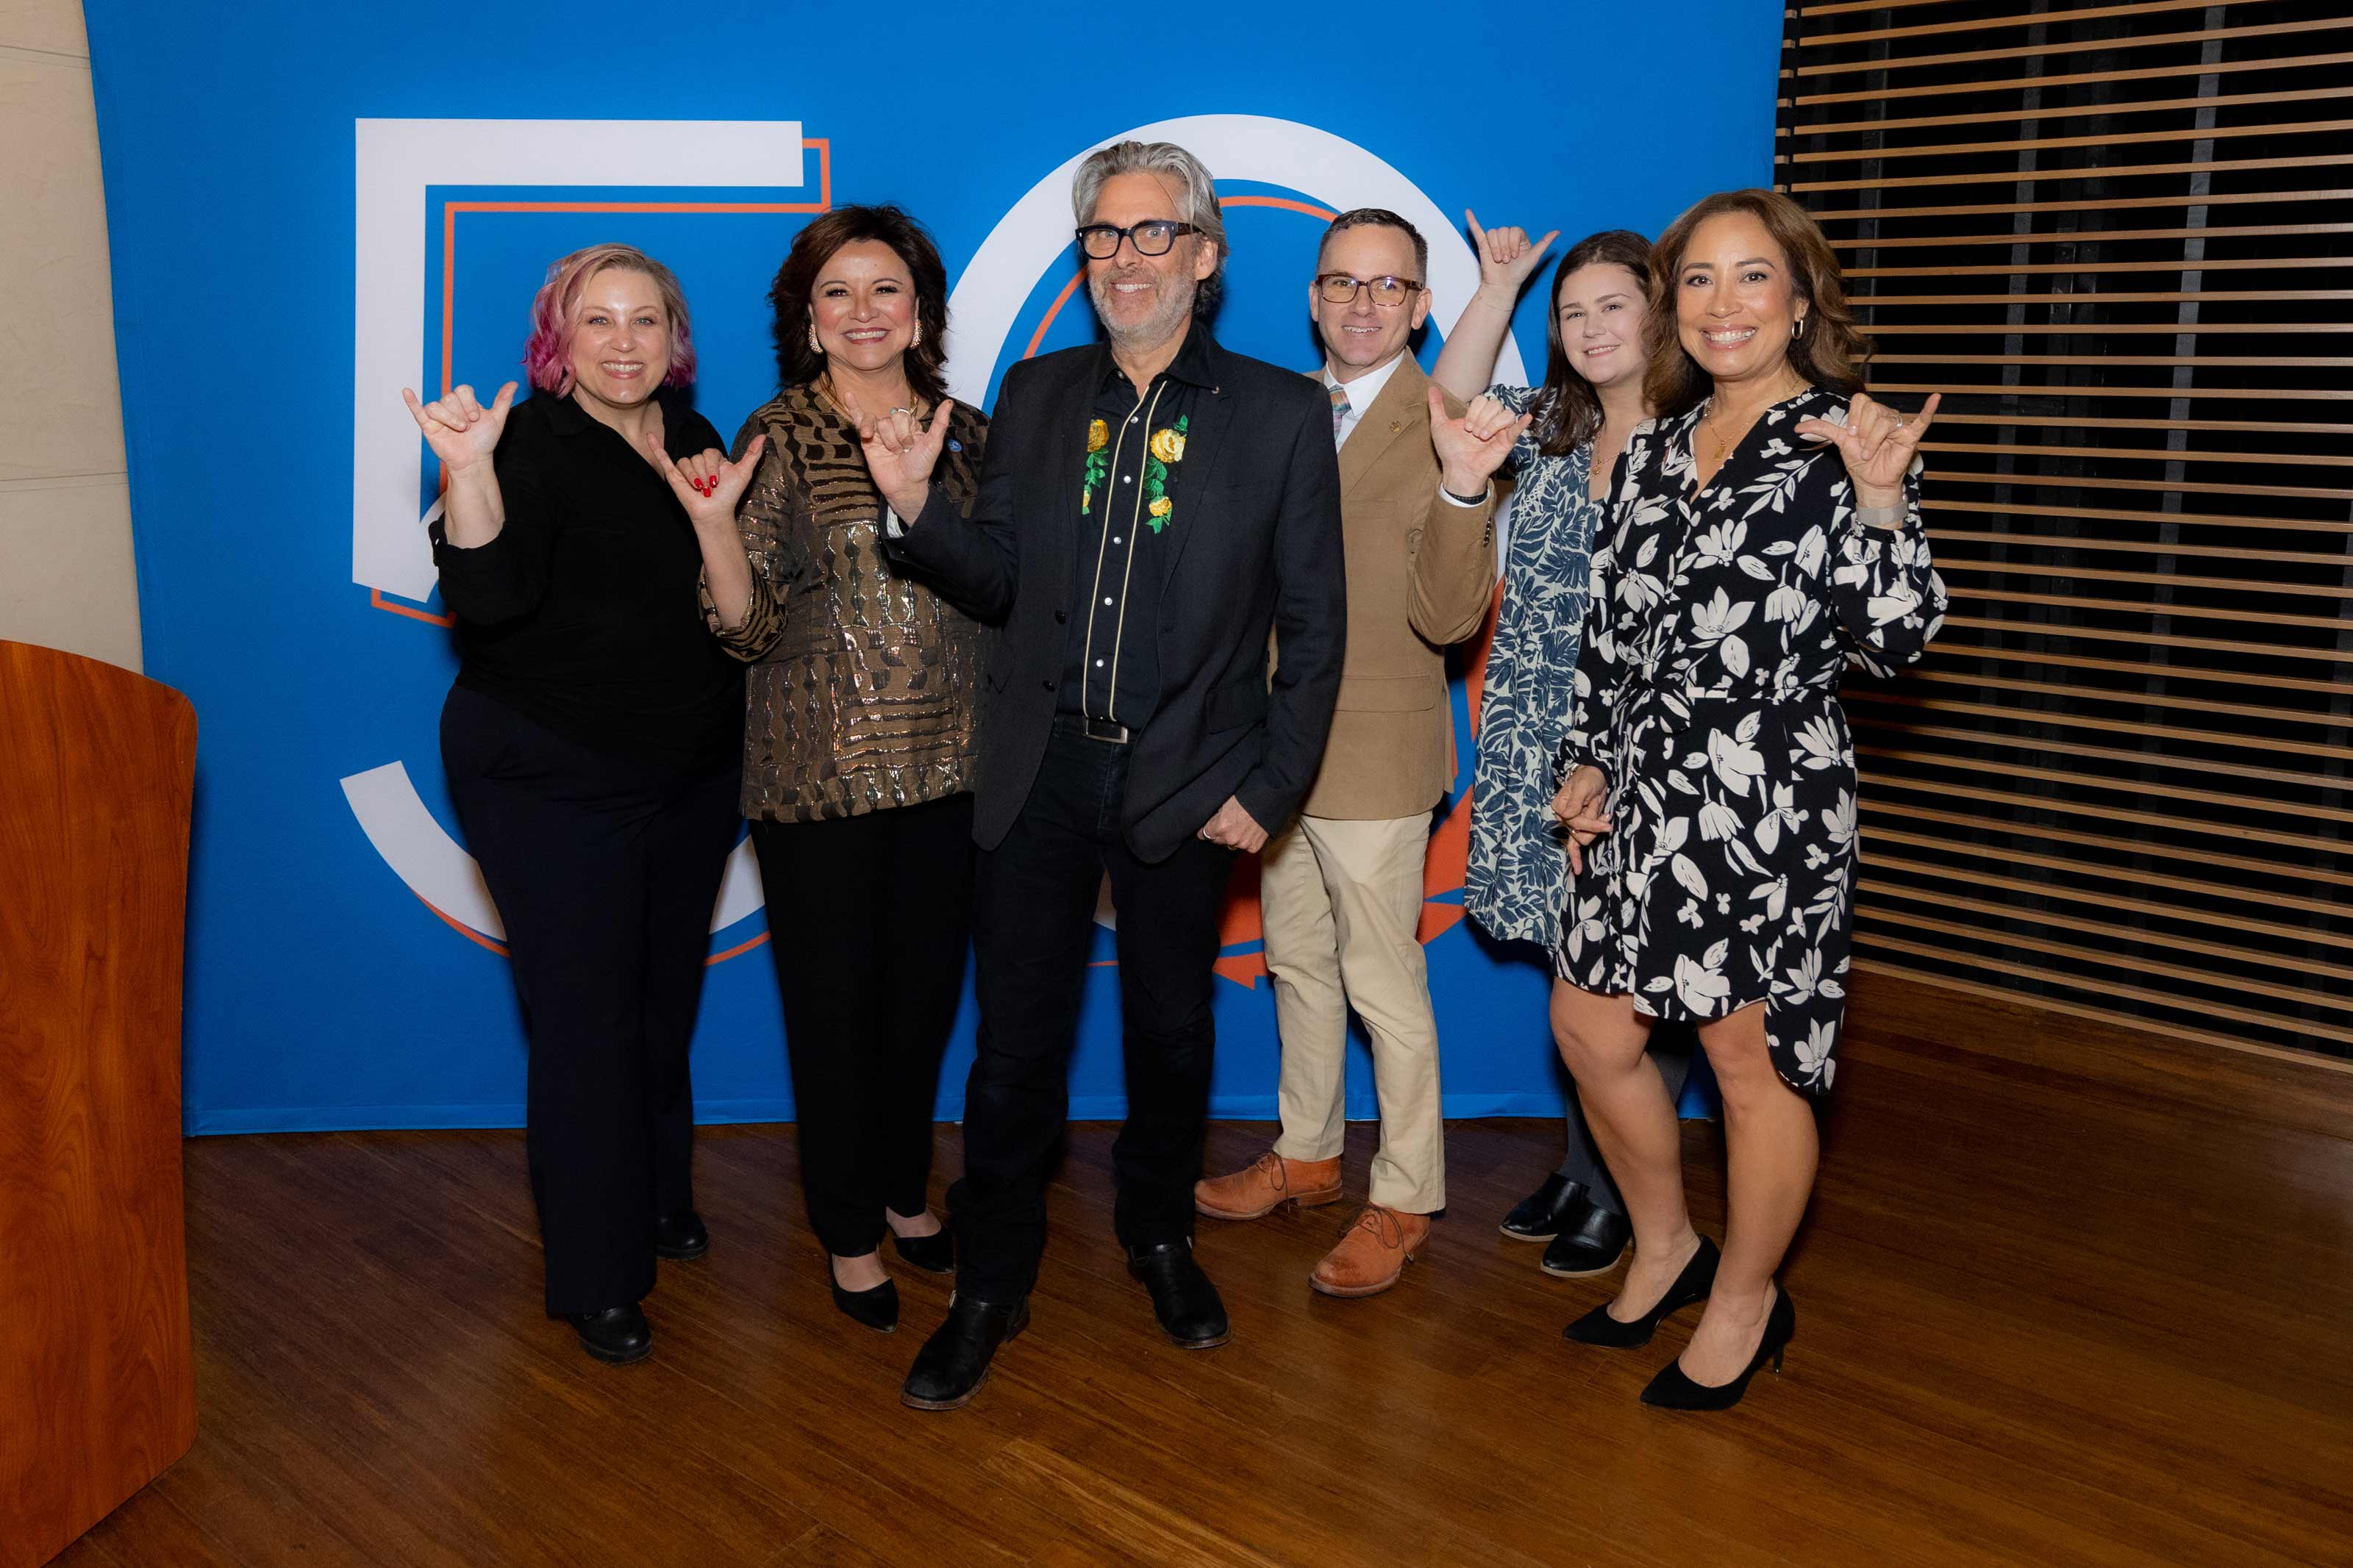 Michael Chabon Posing "Falcons Up" hand sign with other UTPB employees